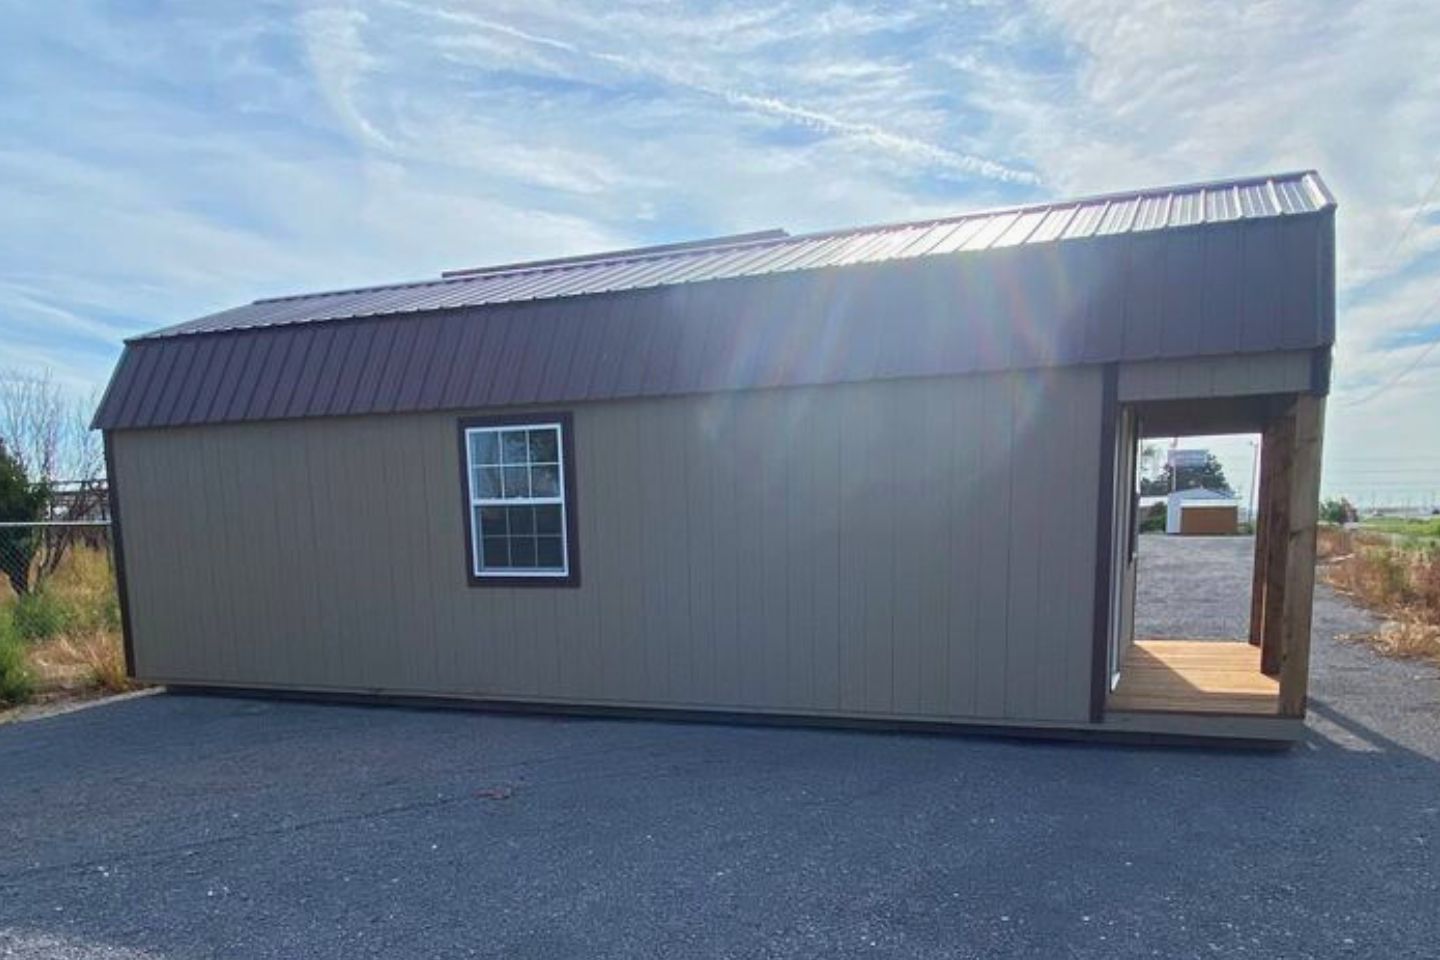 A 16x40 lofted barn shed with a brown metal roof sitting in a dealers lot.